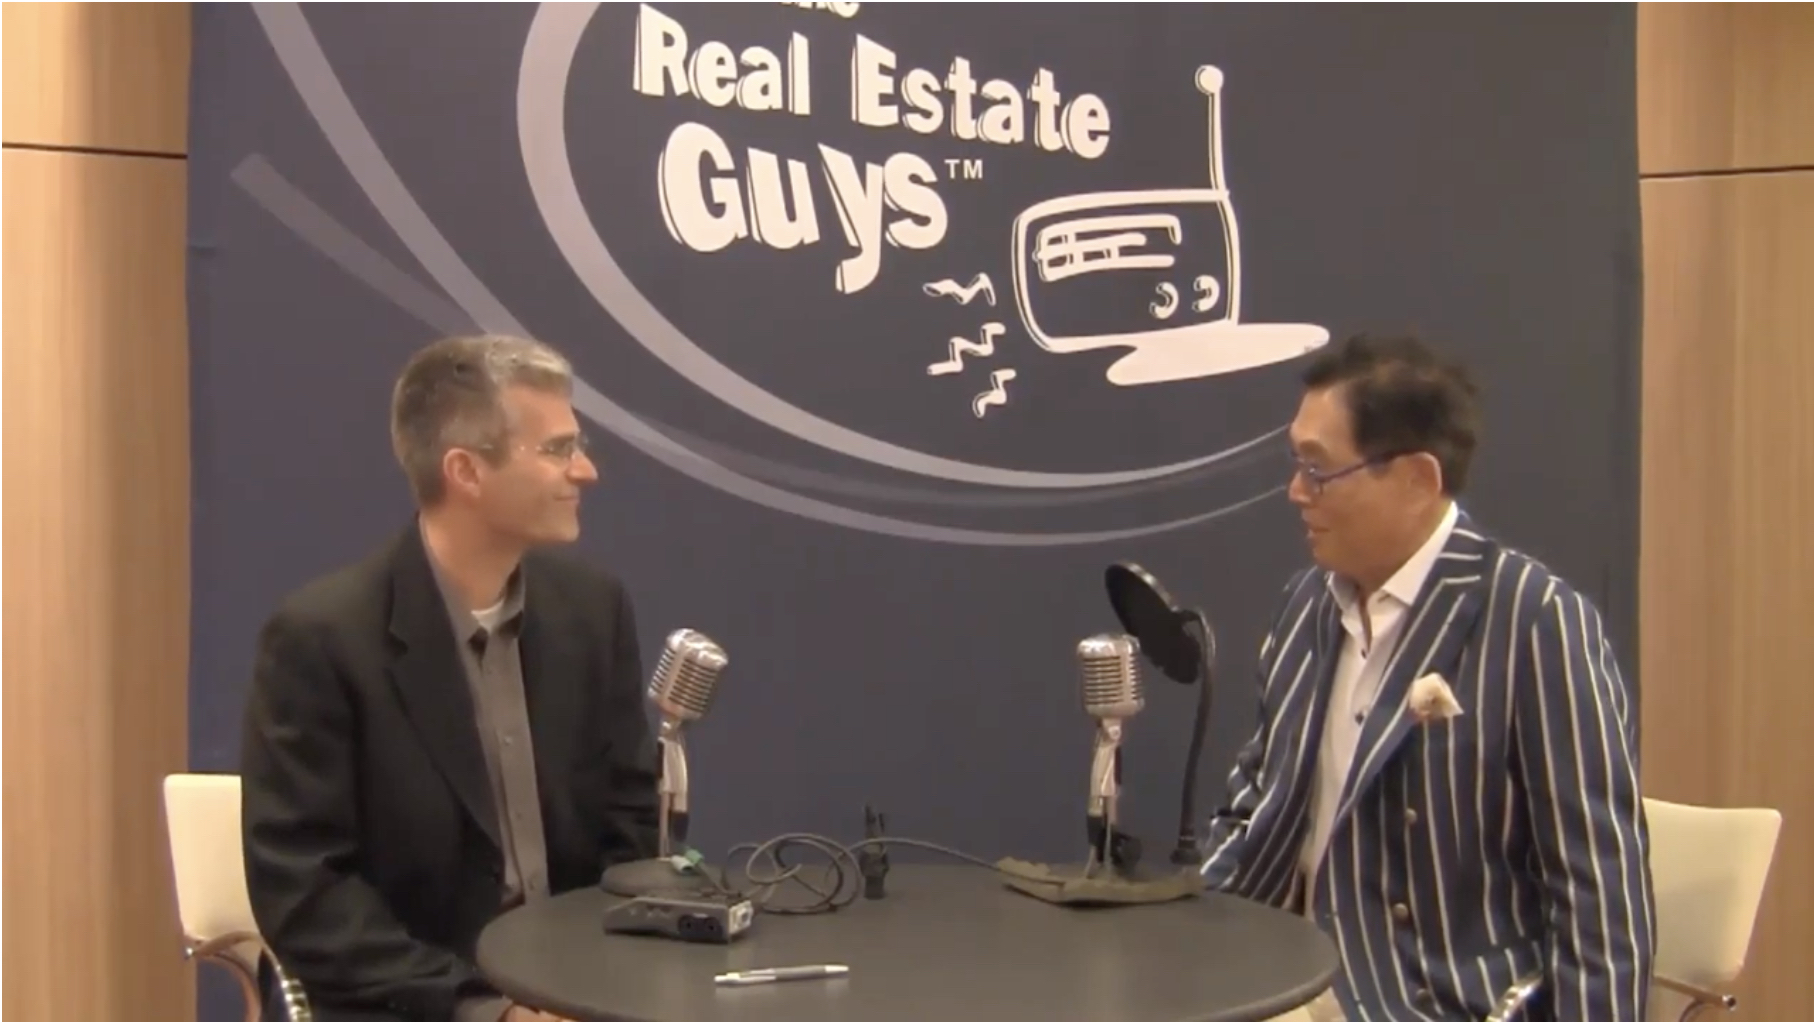 Real Estate Investor, Author and Apartment Building Podcast Host interviews Robert Kiyosaki about his new book "FAKE" during The Investor Summit at Sea hosted by The Real Estate Guys Radio™ Show